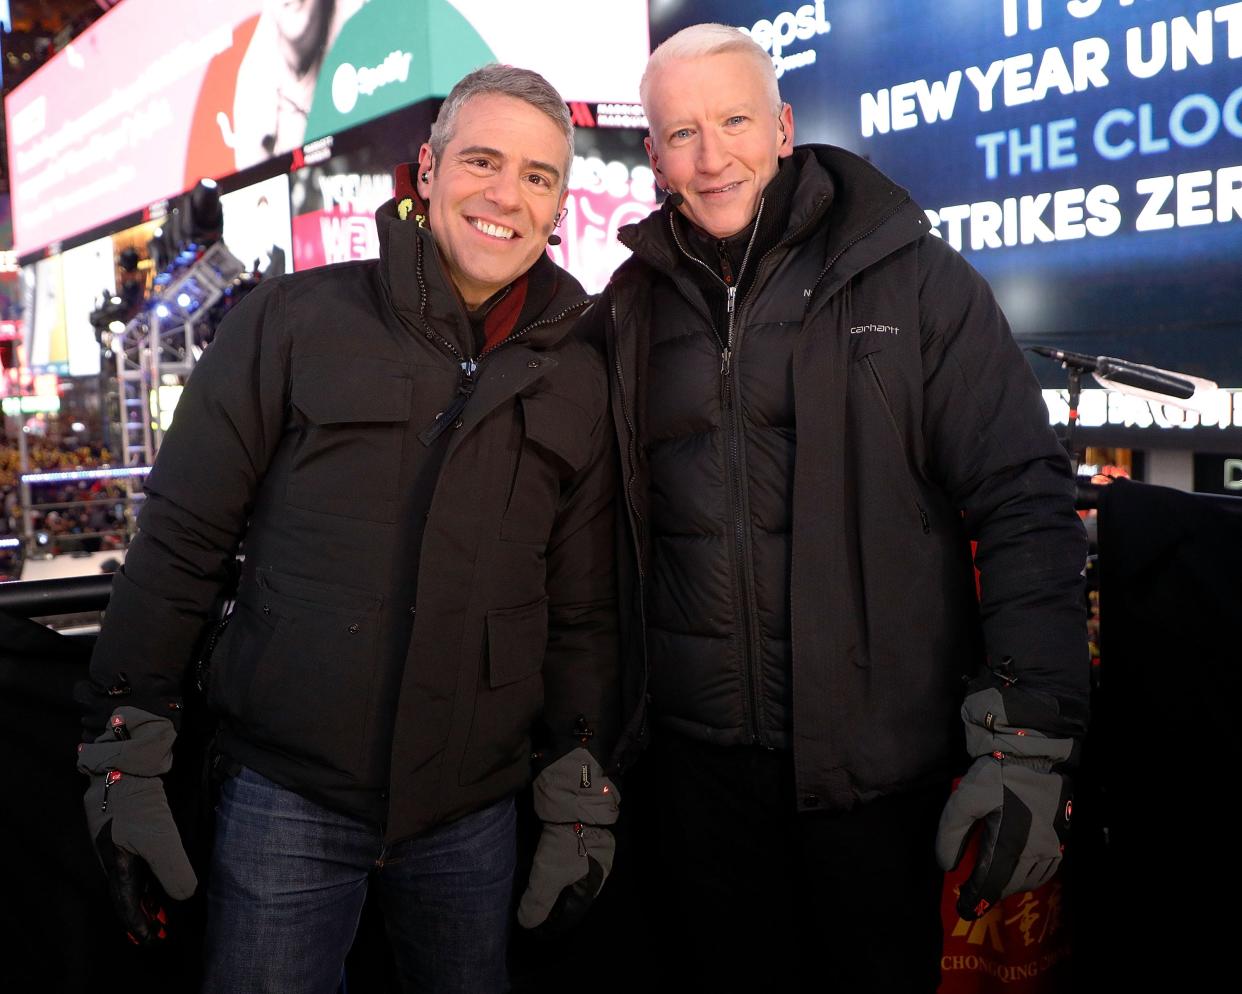 Andy Cohen and Anderson Cooper host CNN's New Year's Eve coverage on December 31, 2017 in New York City.